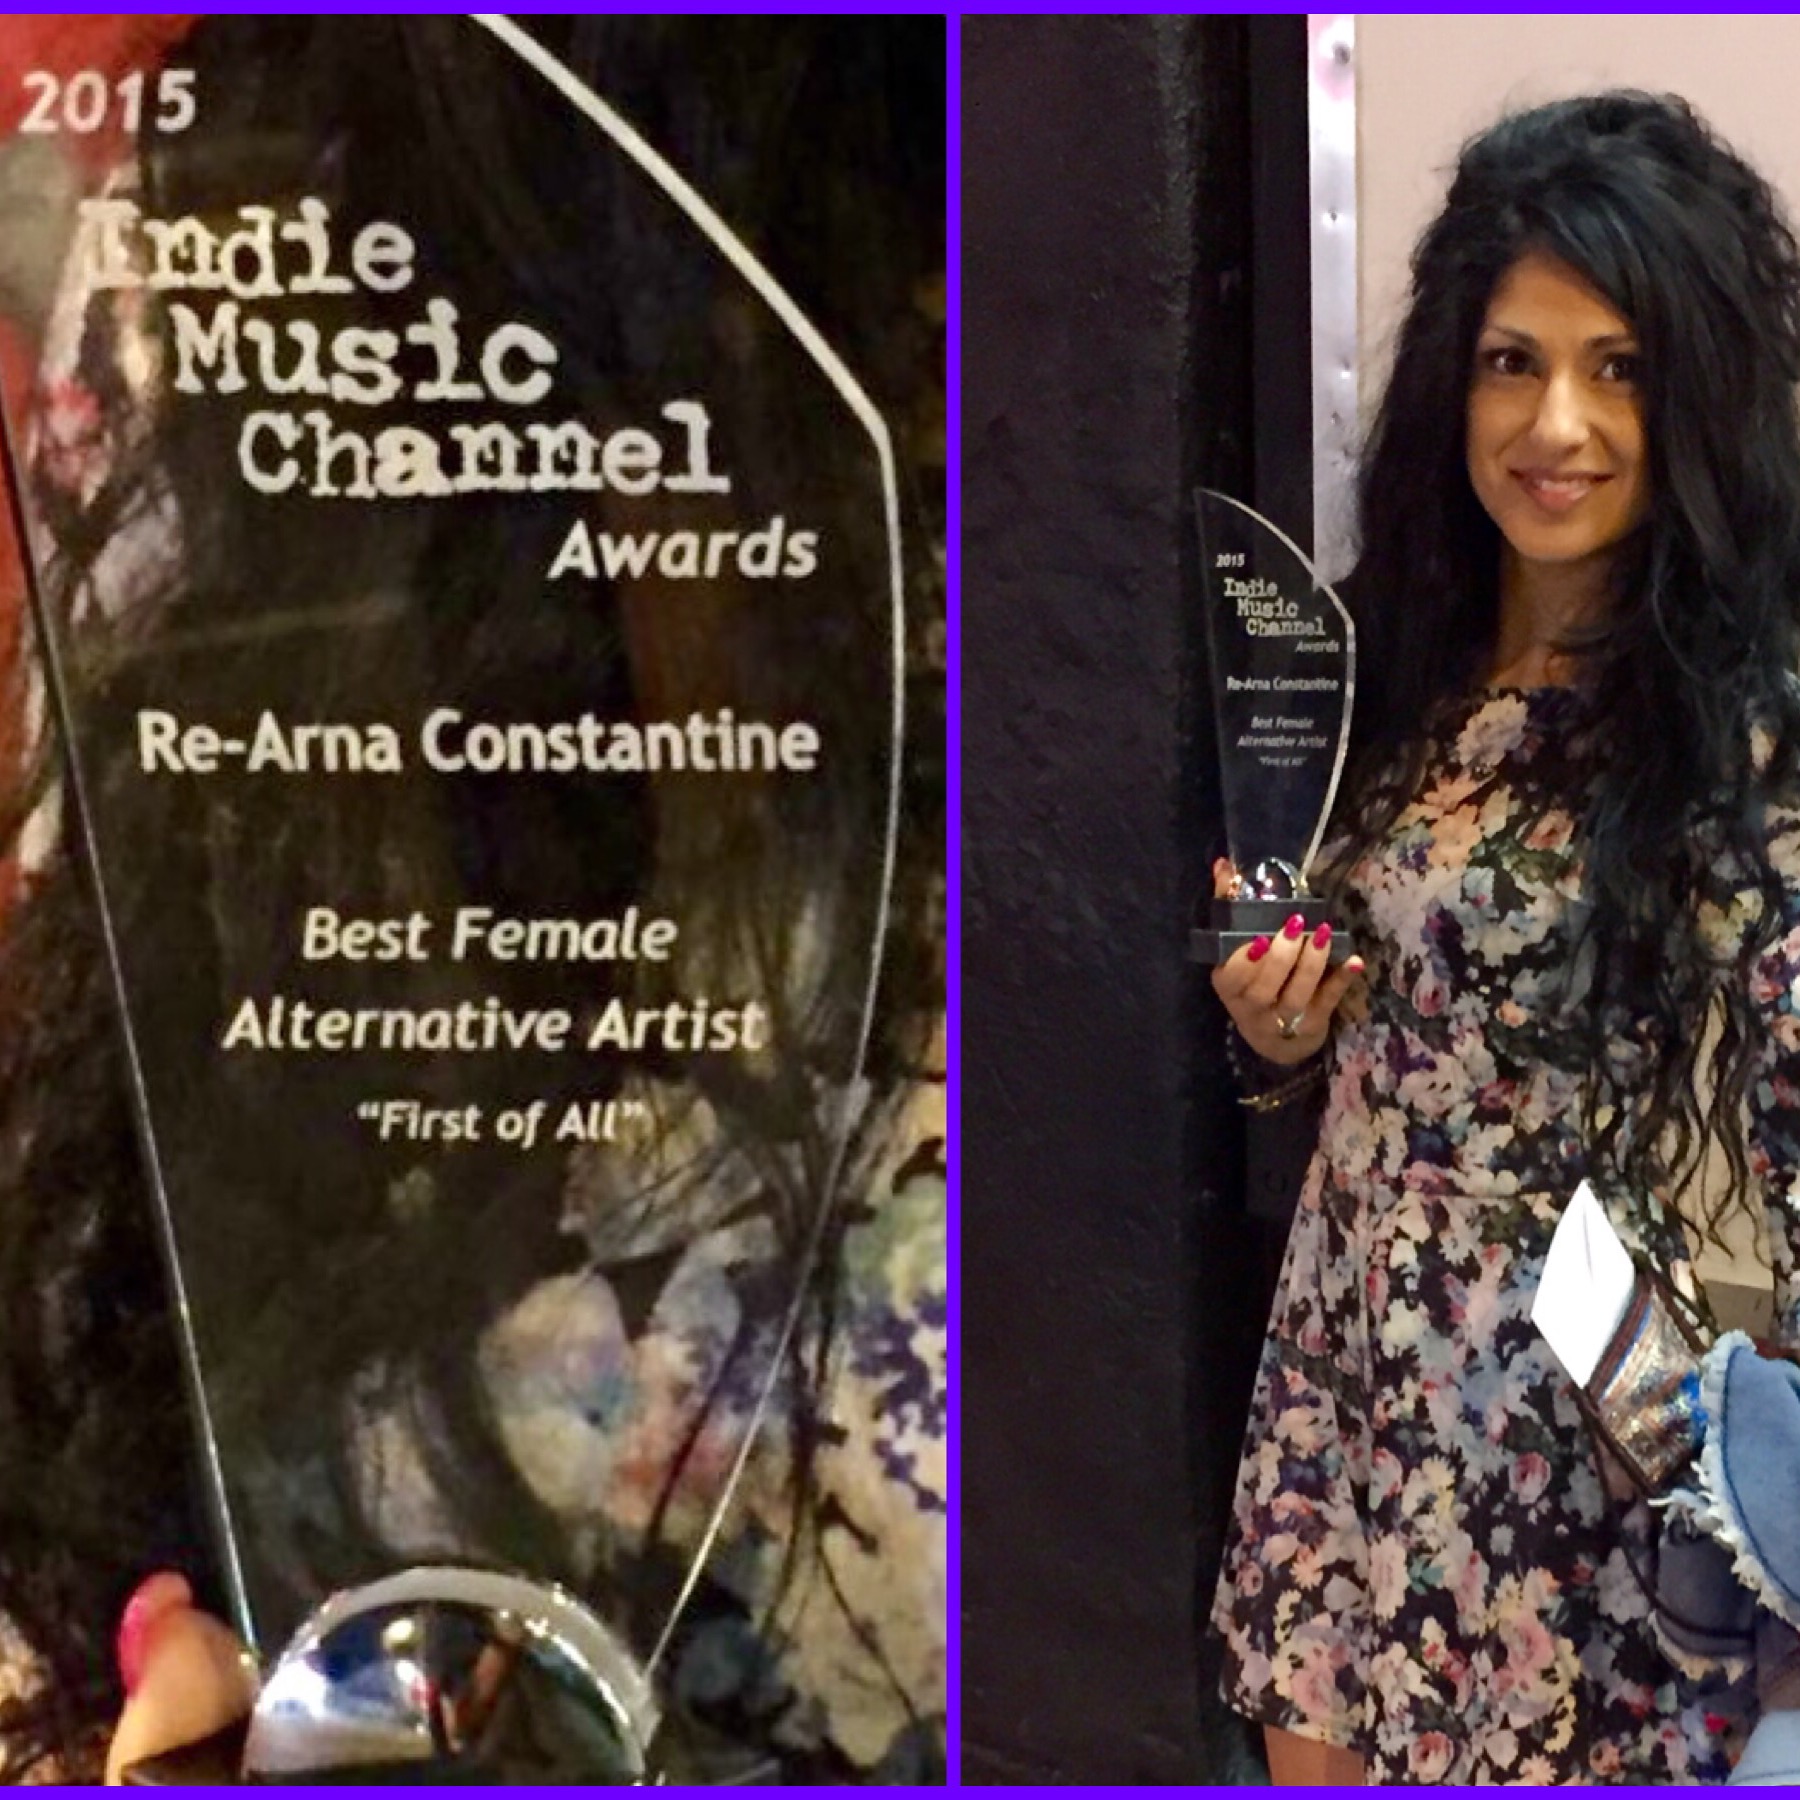 Audio Visual Media Client, Rearna Constantine Shows off her "2015 Indie Music Channel Award" for her song "First Of All' Produced by Domenic Pernasilici alongside Rearna Constantine.